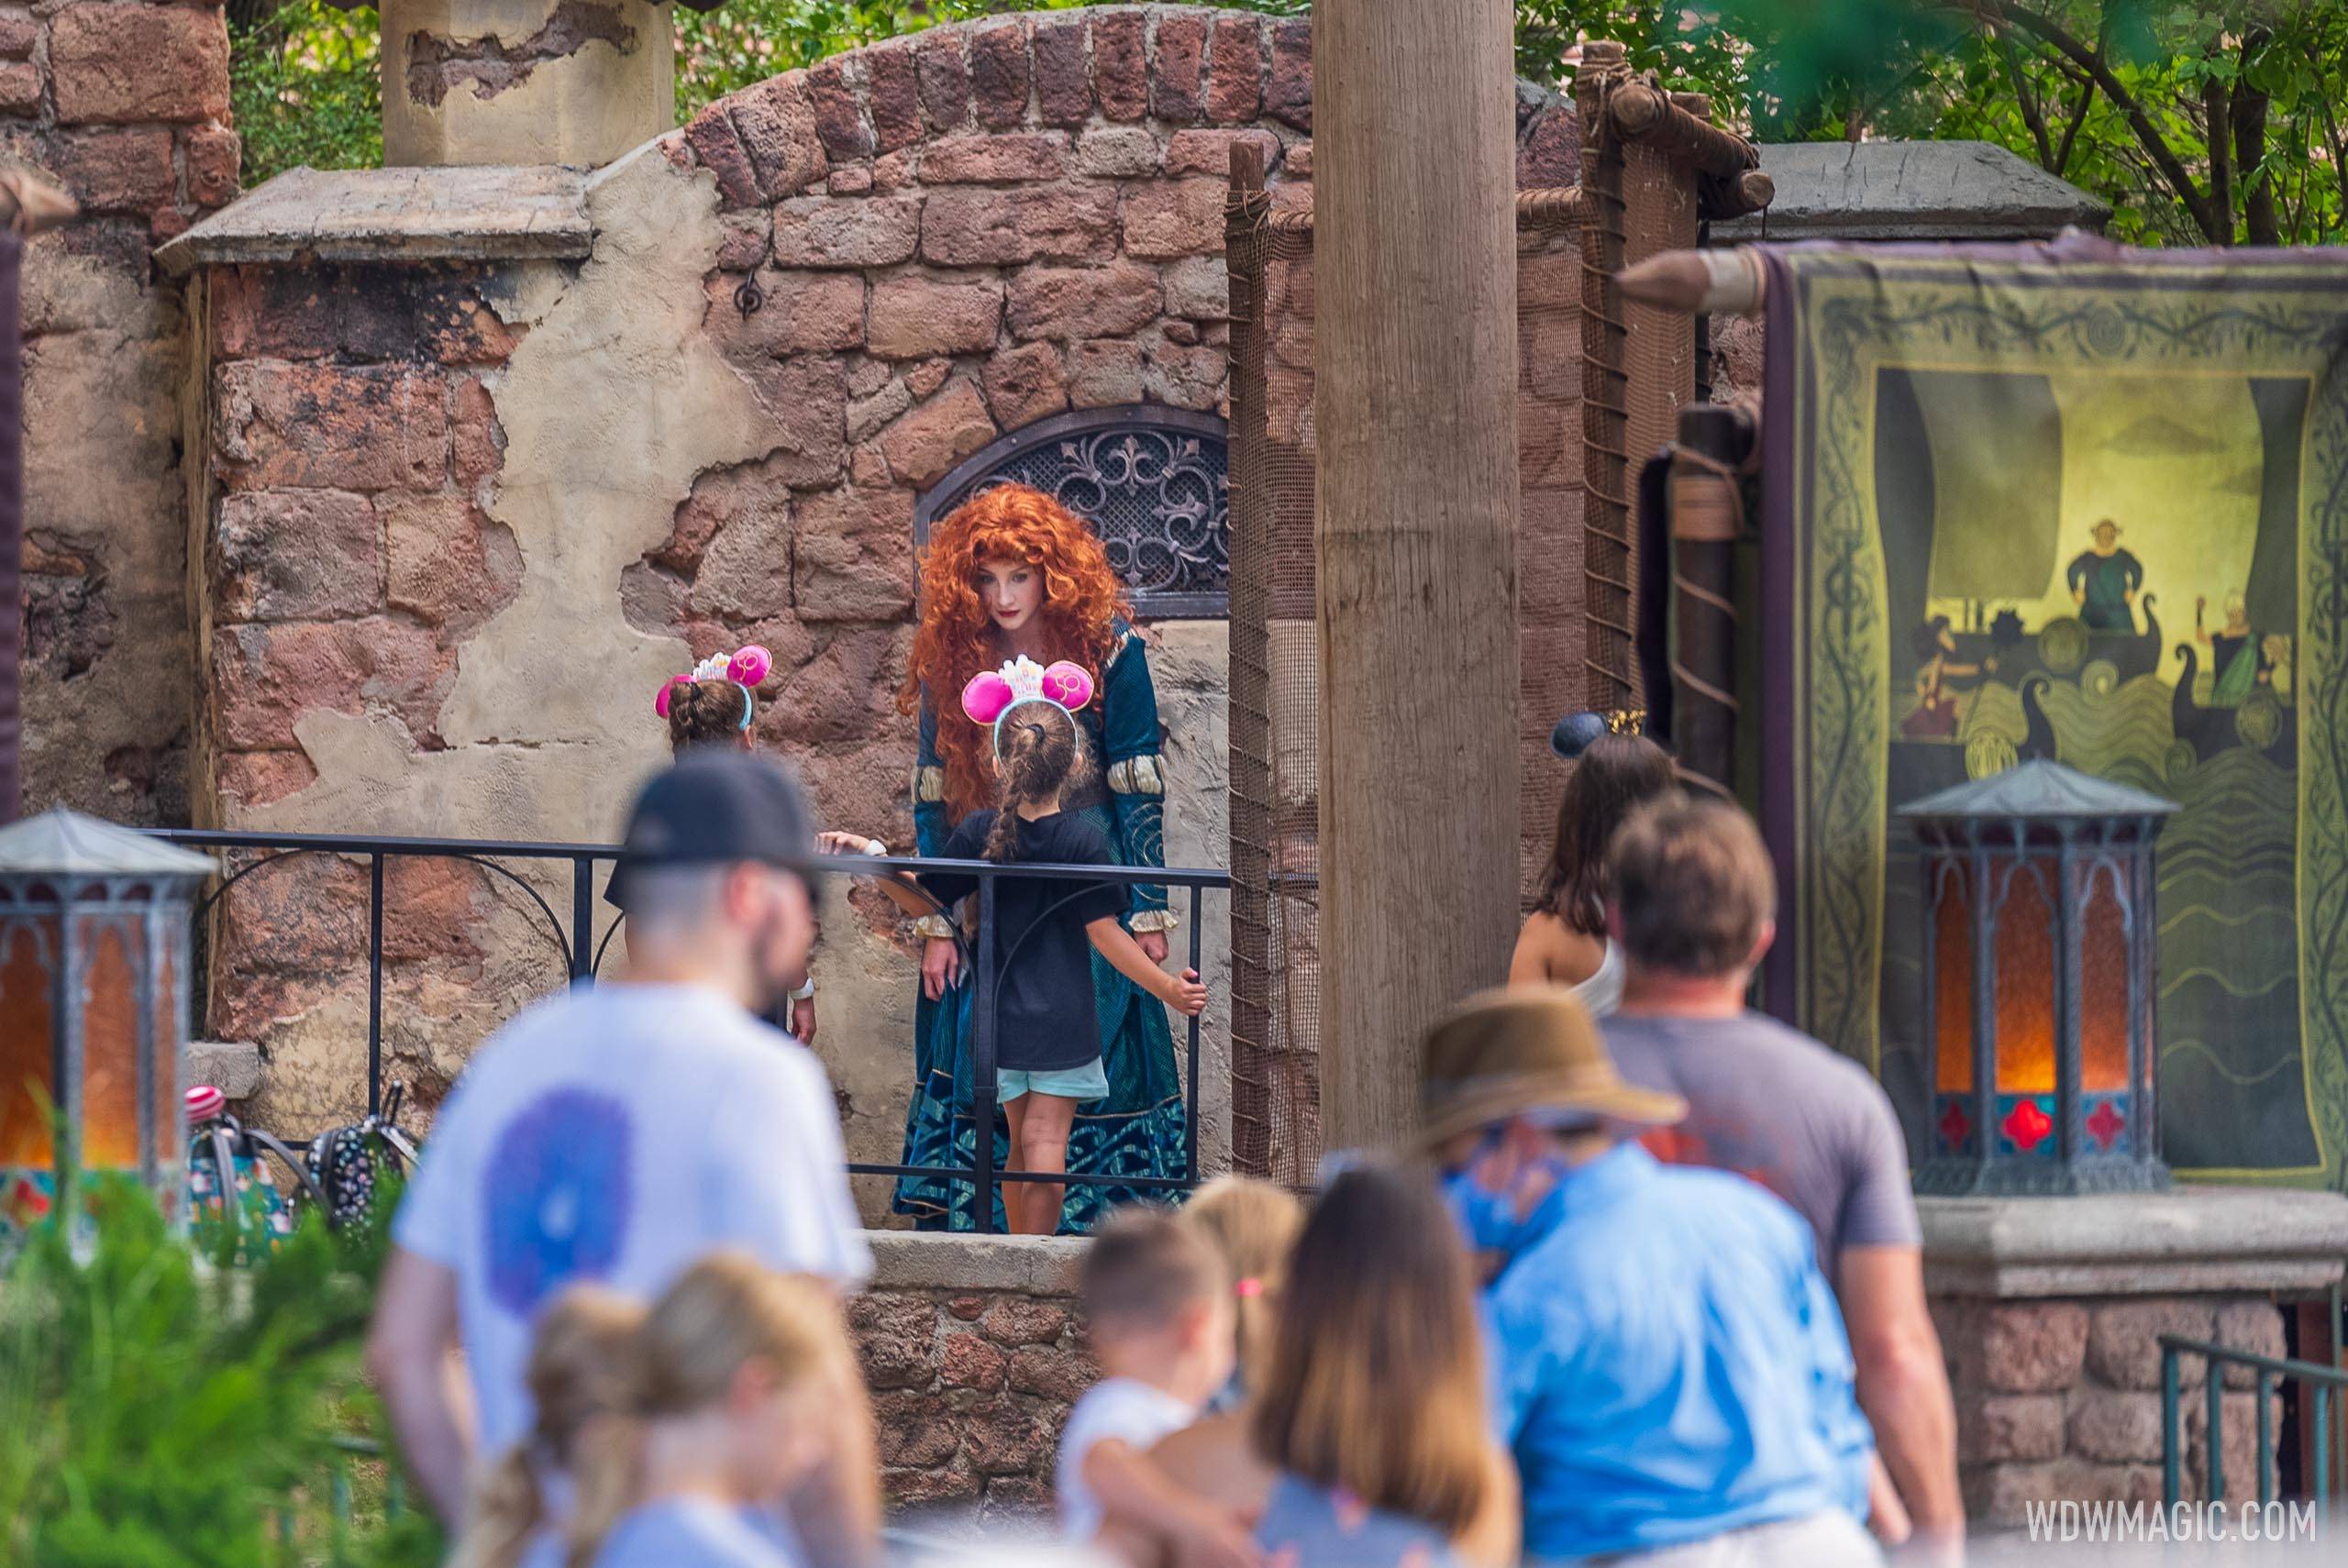 Merida meet and greet at Magic Kingdom moves to new location to make way for Mirabel from Encanto